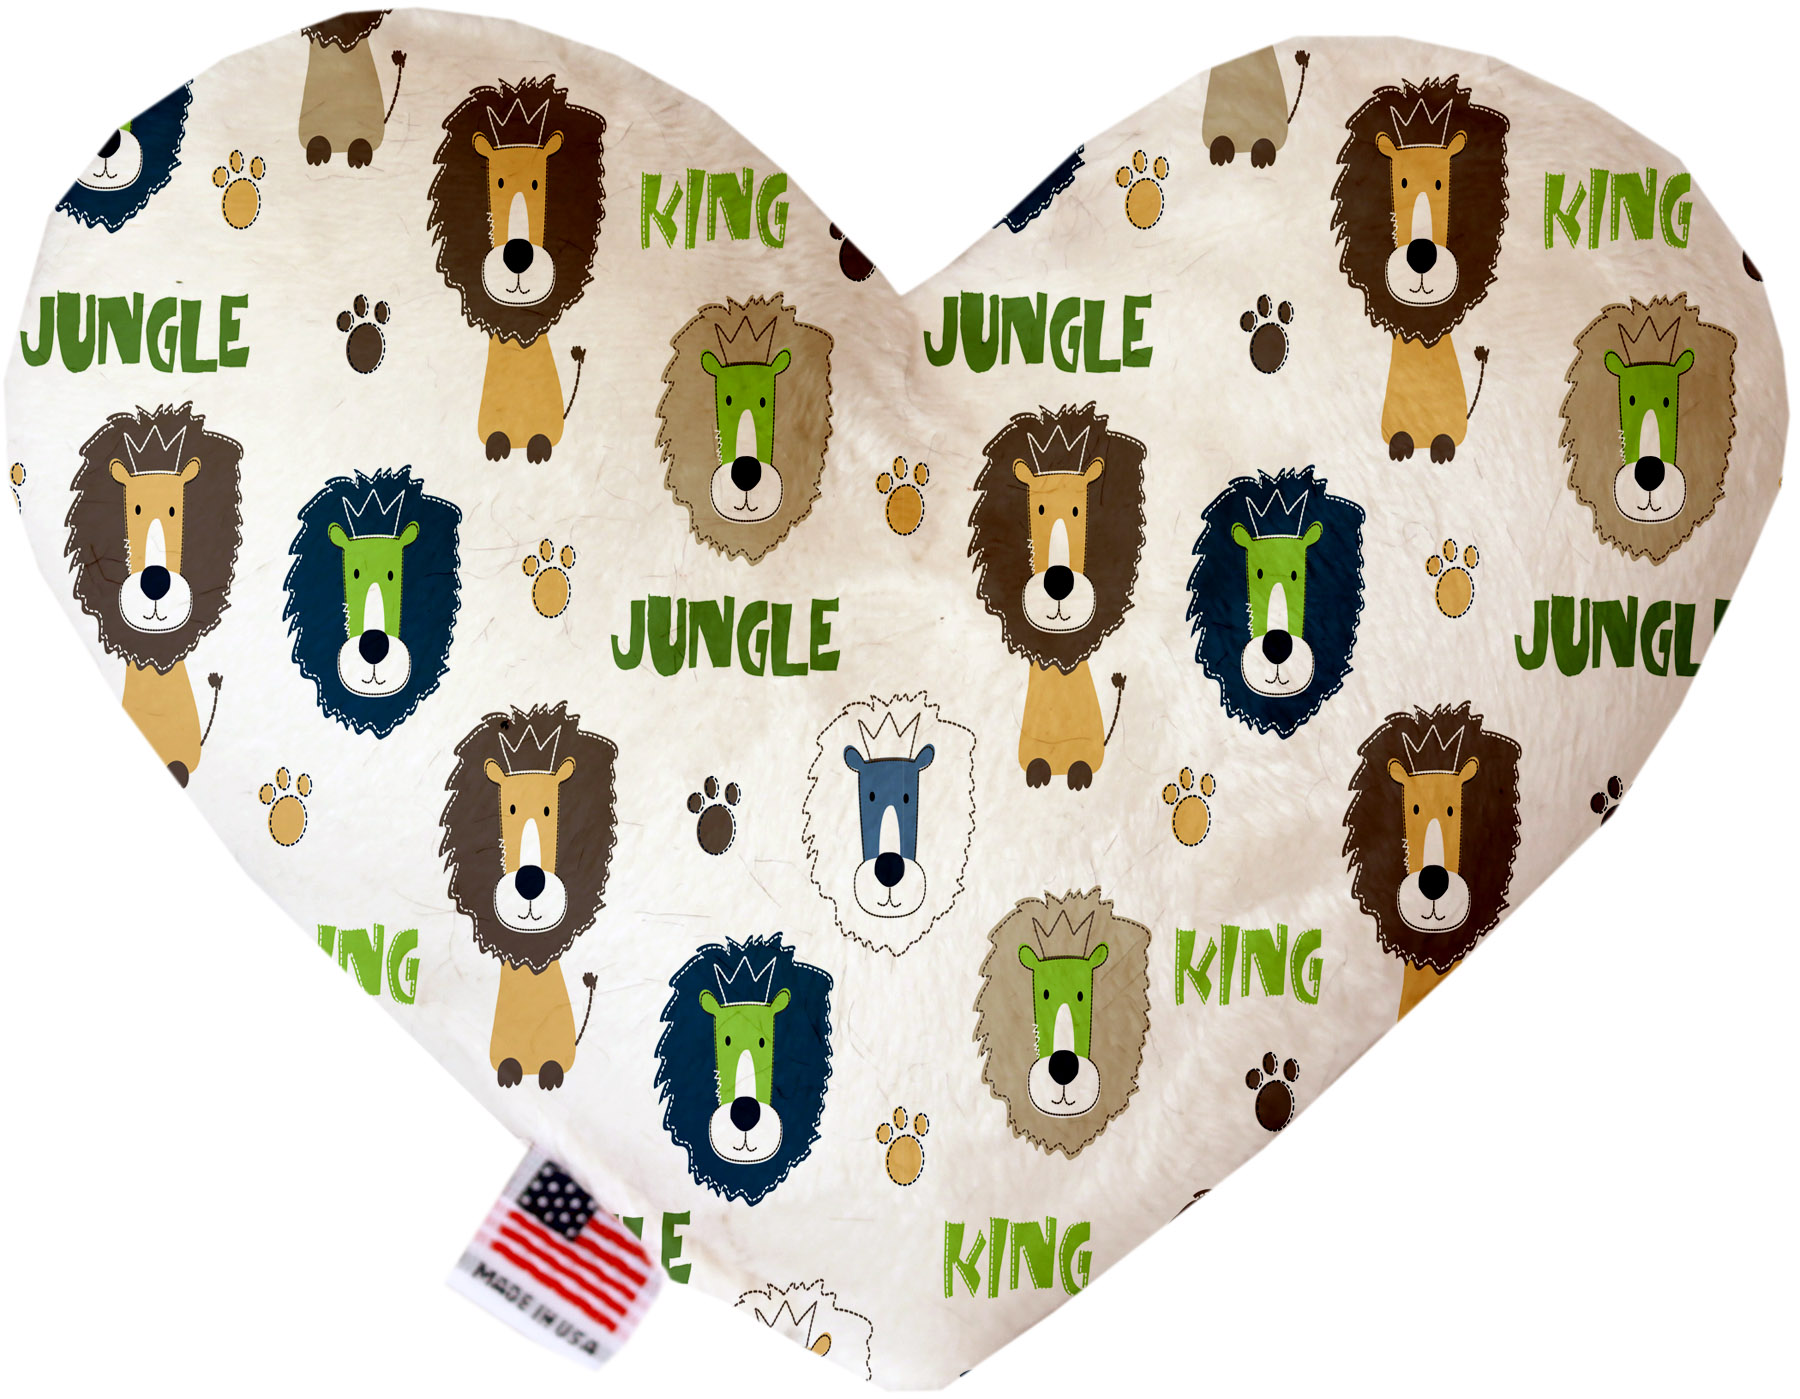 King of the Jungle 8 Inch Heart Dog Toy